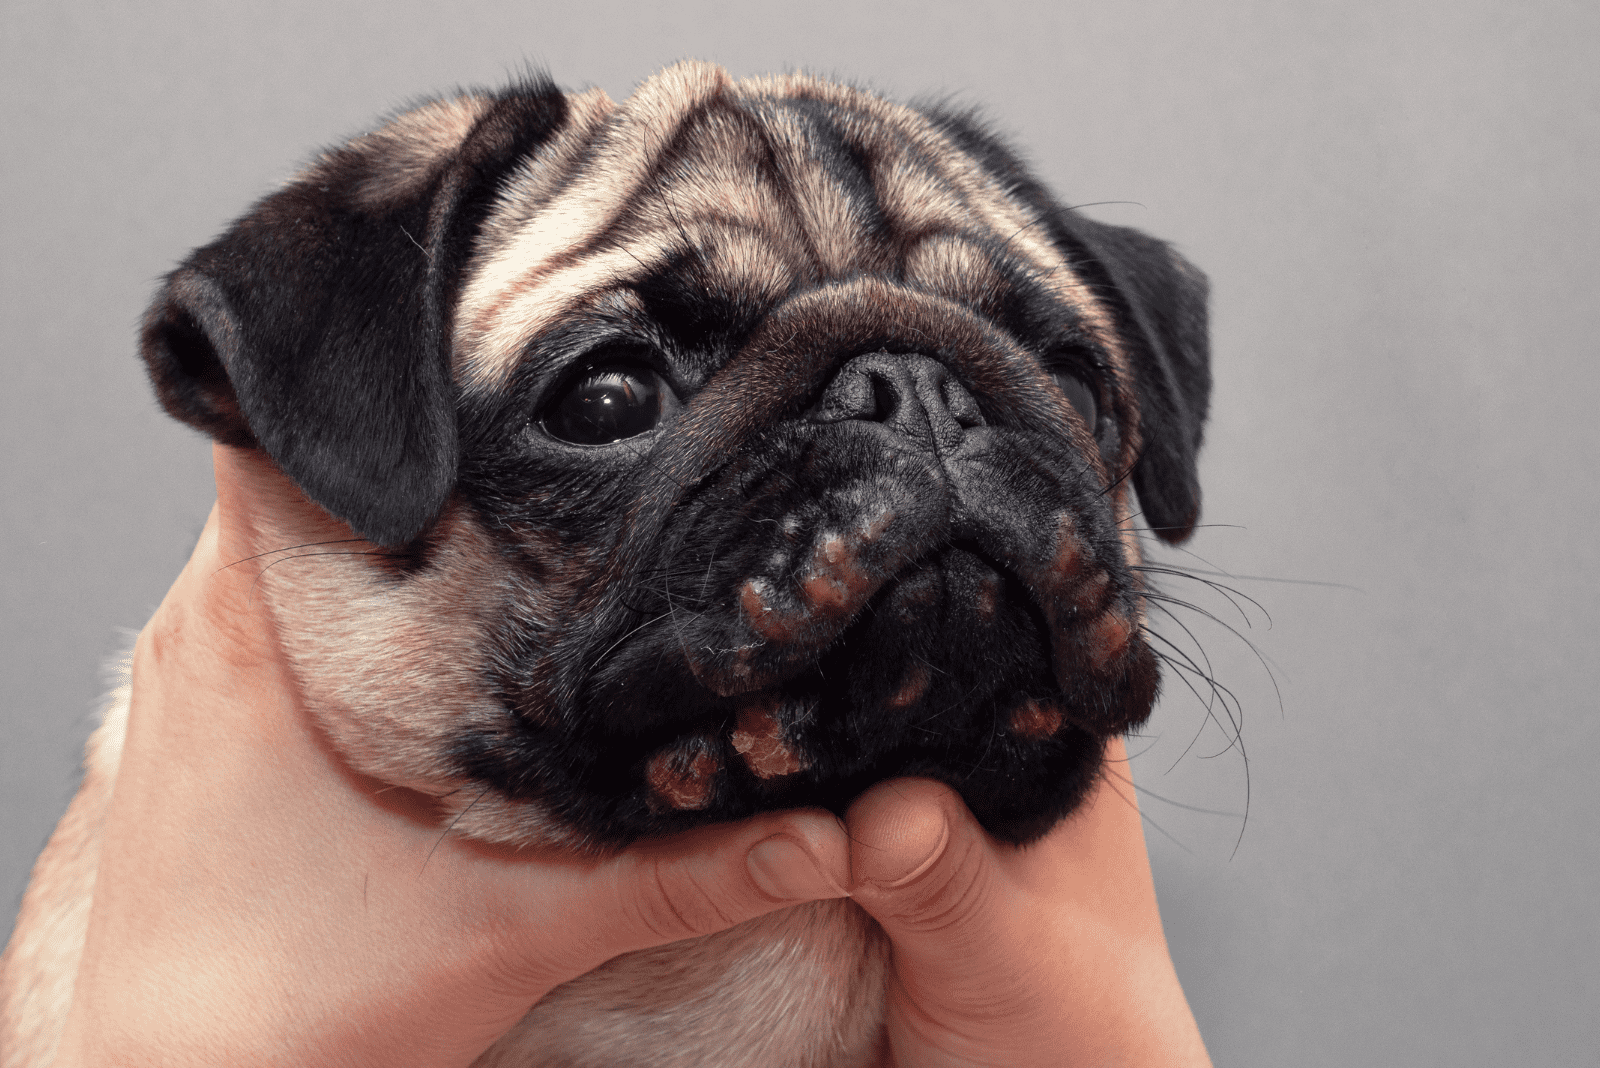 Occurrence Of Crusty Scabs Around Dog’s Mouth: 9 Explanations